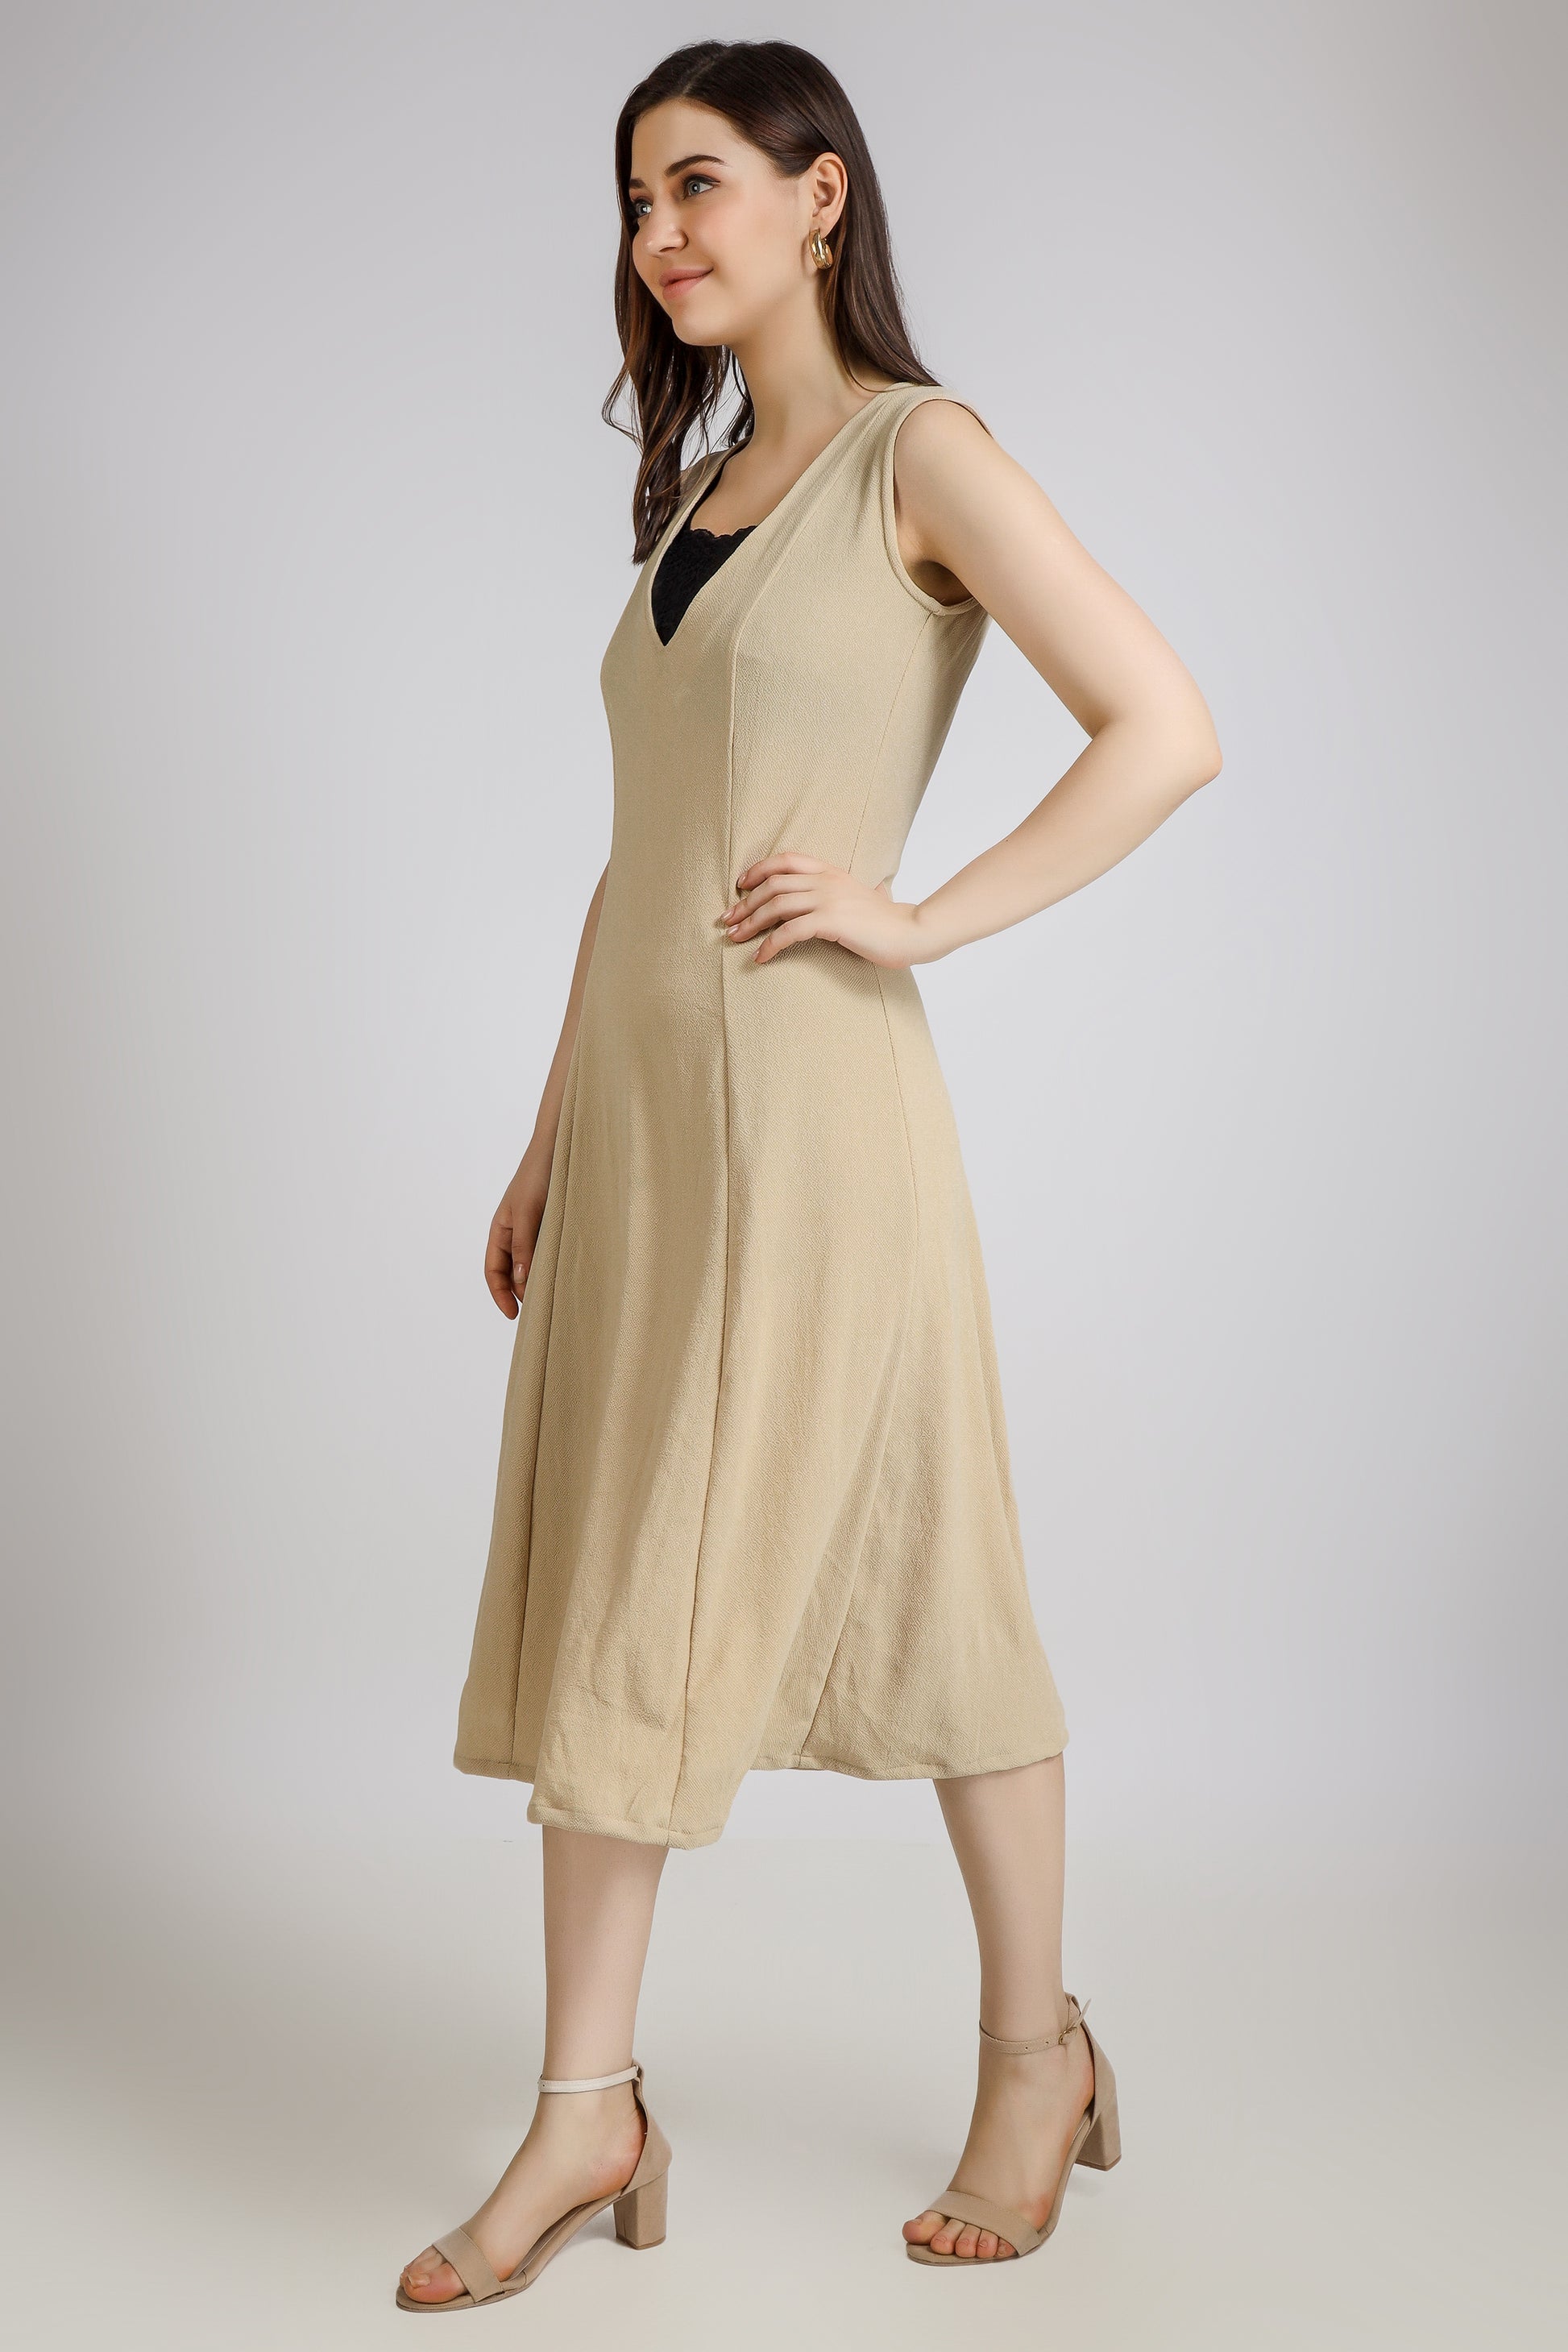 Vomendi Beige Bodycon Dress with Princess Seam and Cut Sleeves